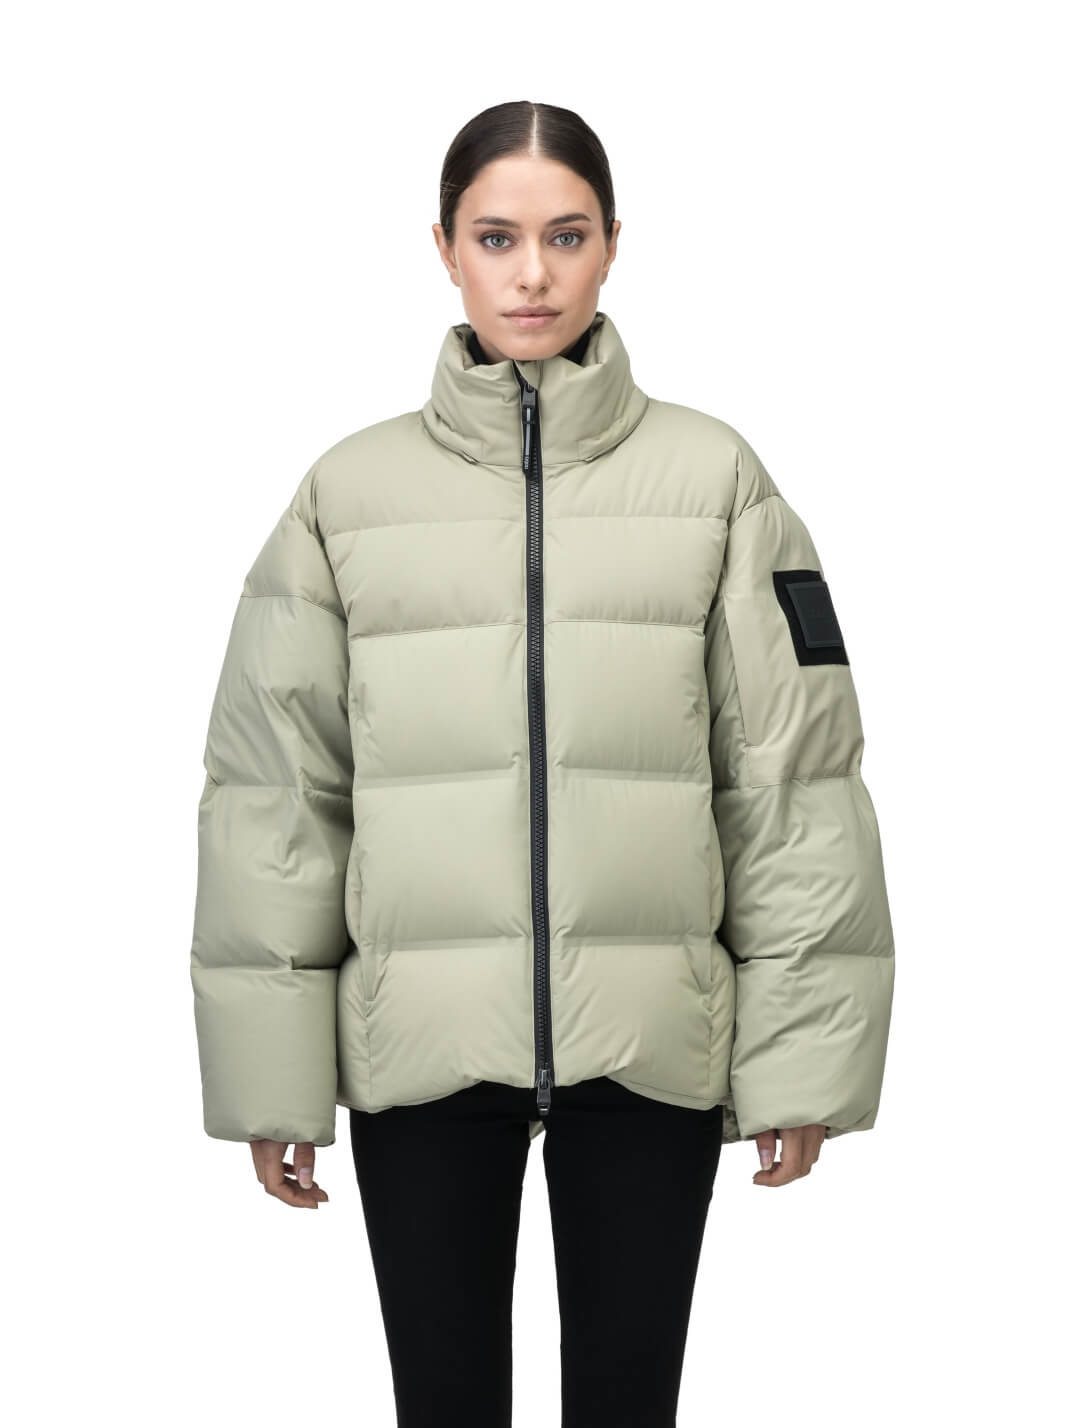 Una Ladies Performance Puffer in hip length, Technical Taffeta and Durable Stretch Ripstop fabrication, Premium Canadian White Duck Down insulation, removable down filled hood, centre front two-way zipper, and side-entry pockets at waist, in Tea